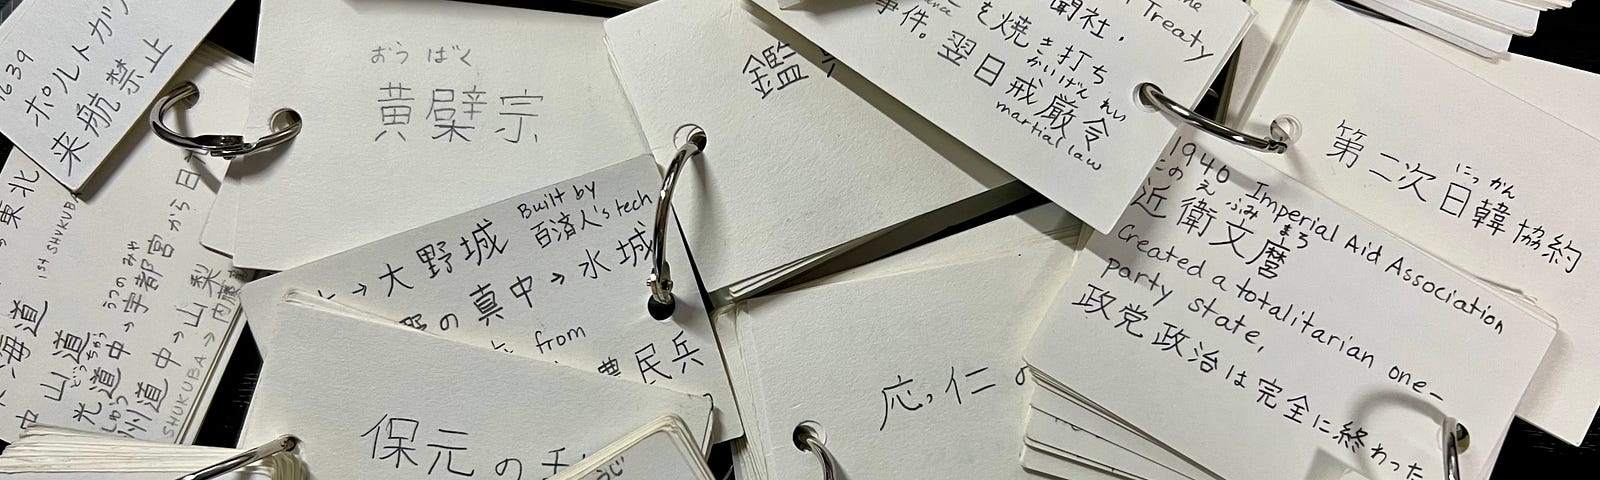 Packs of small cards written with Japanese and English words about events in Japanese history.